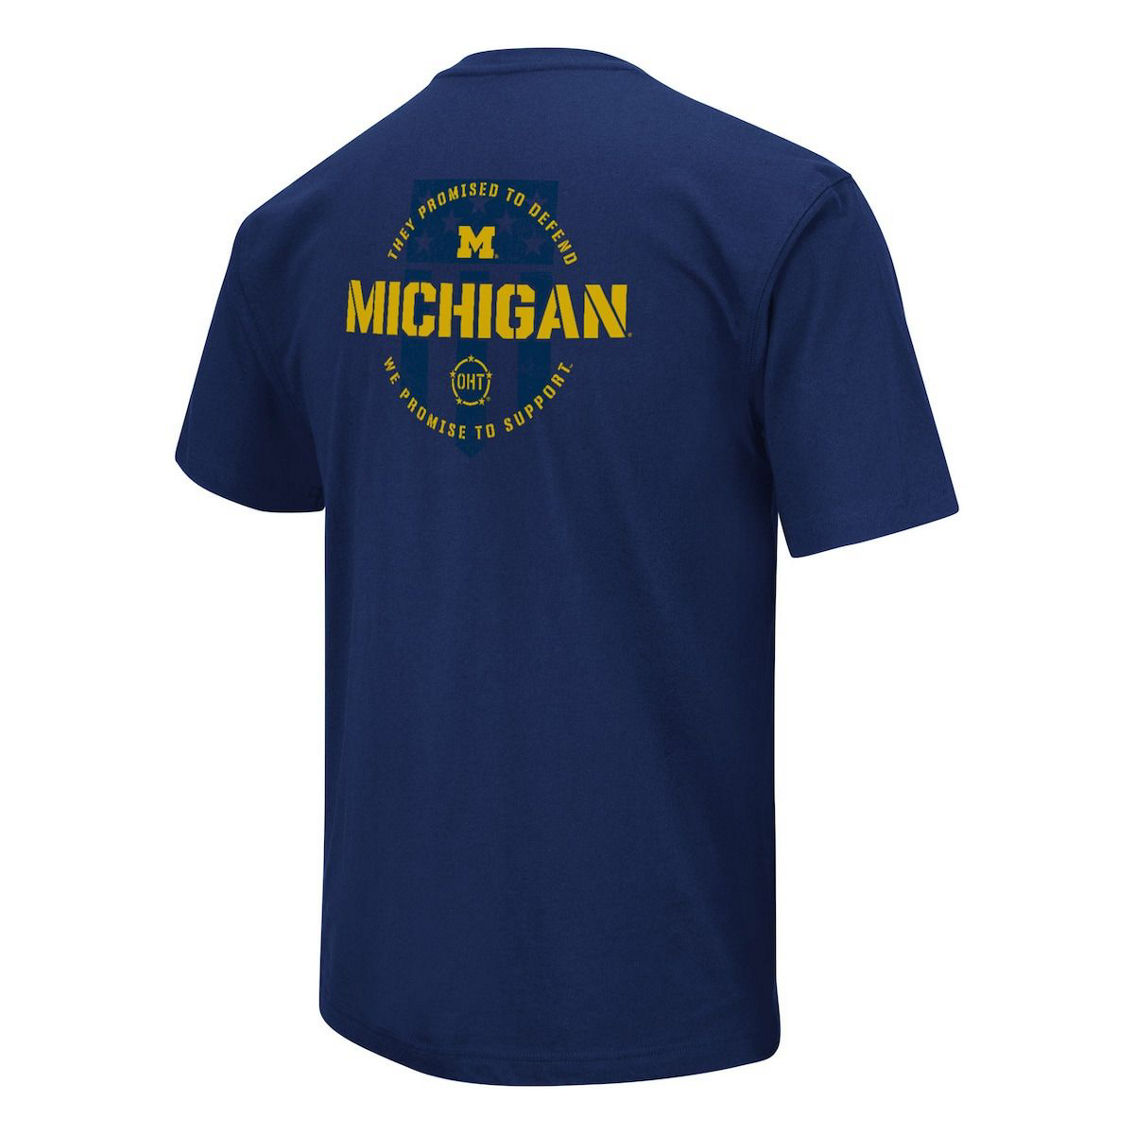 Colosseum Men's Navy Michigan Wolverines OHT Military Appreciation T-Shirt - Image 4 of 4